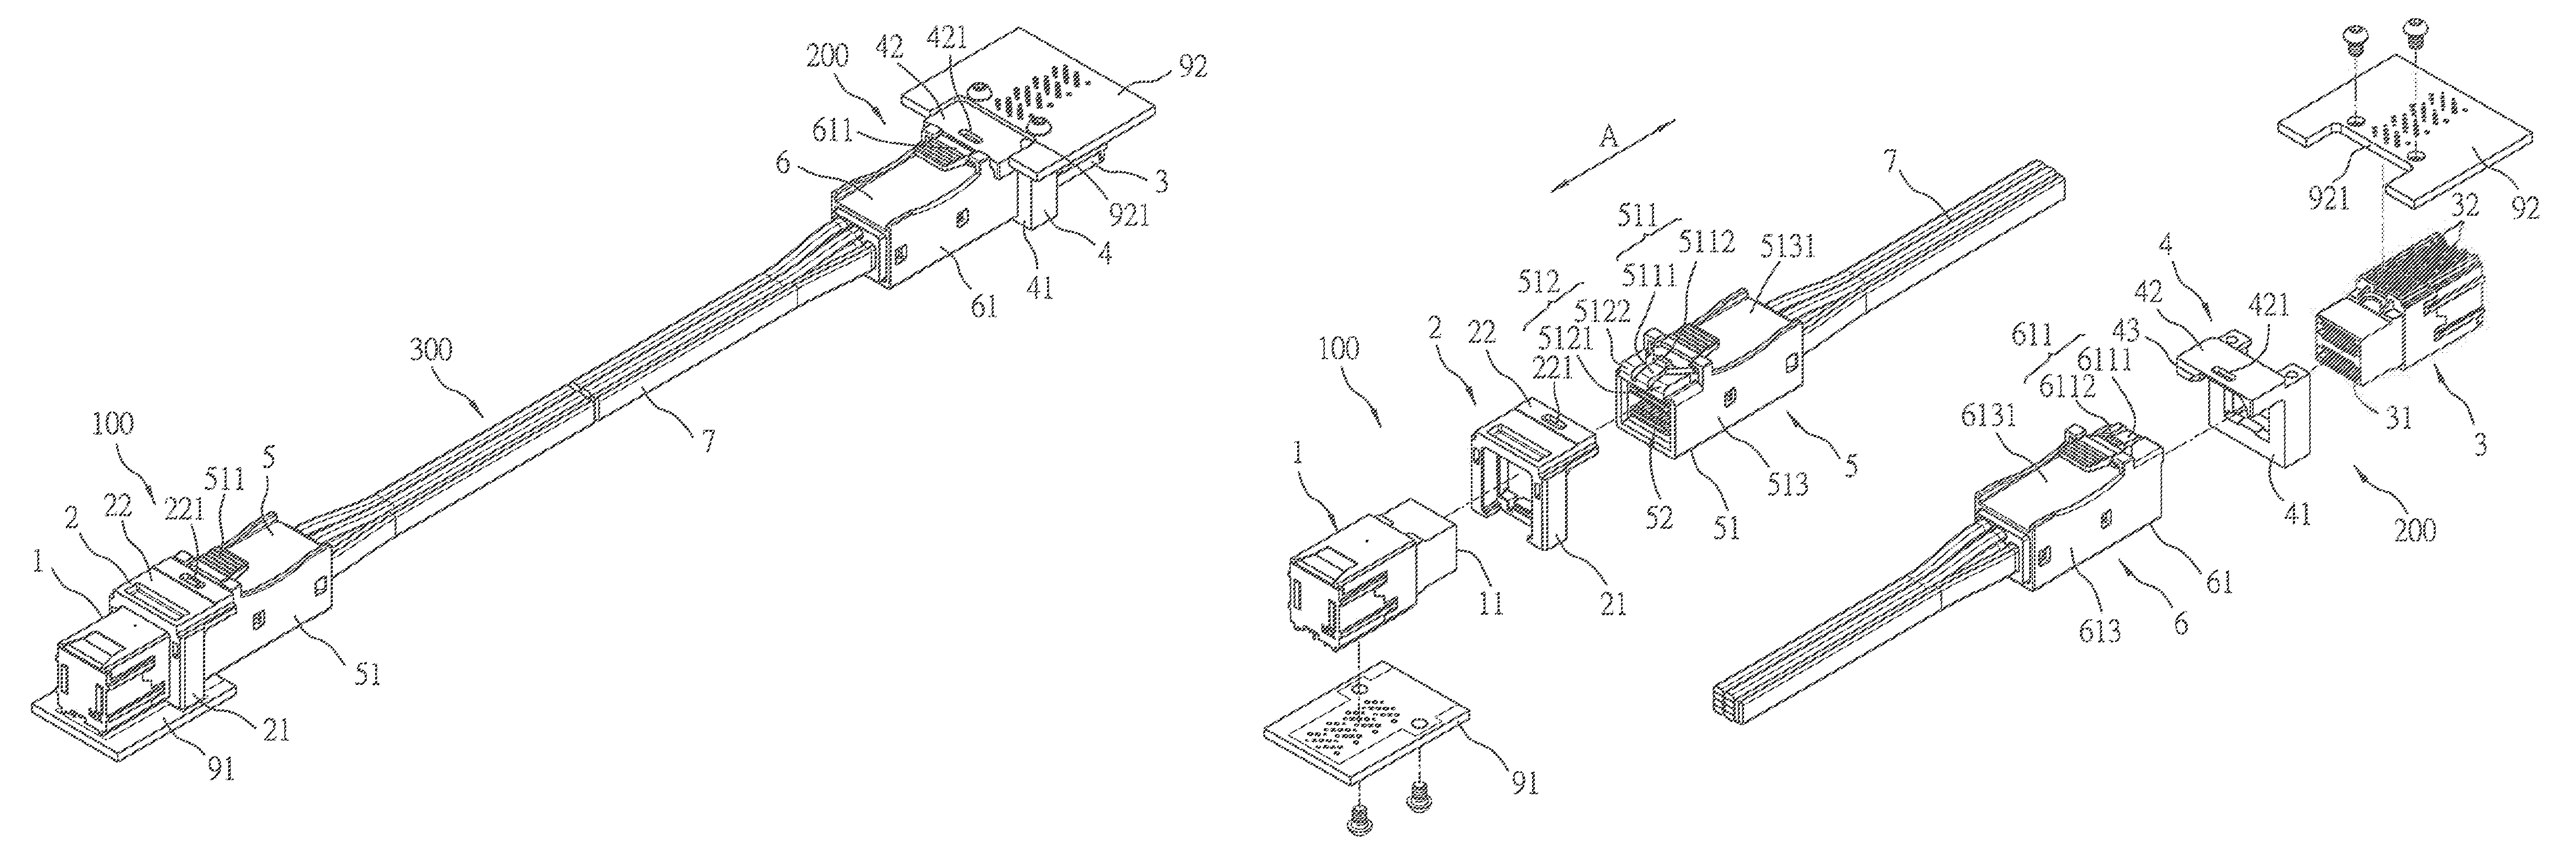 Electrical connection device having a standard plug and a reverse plug at two ends of a cable